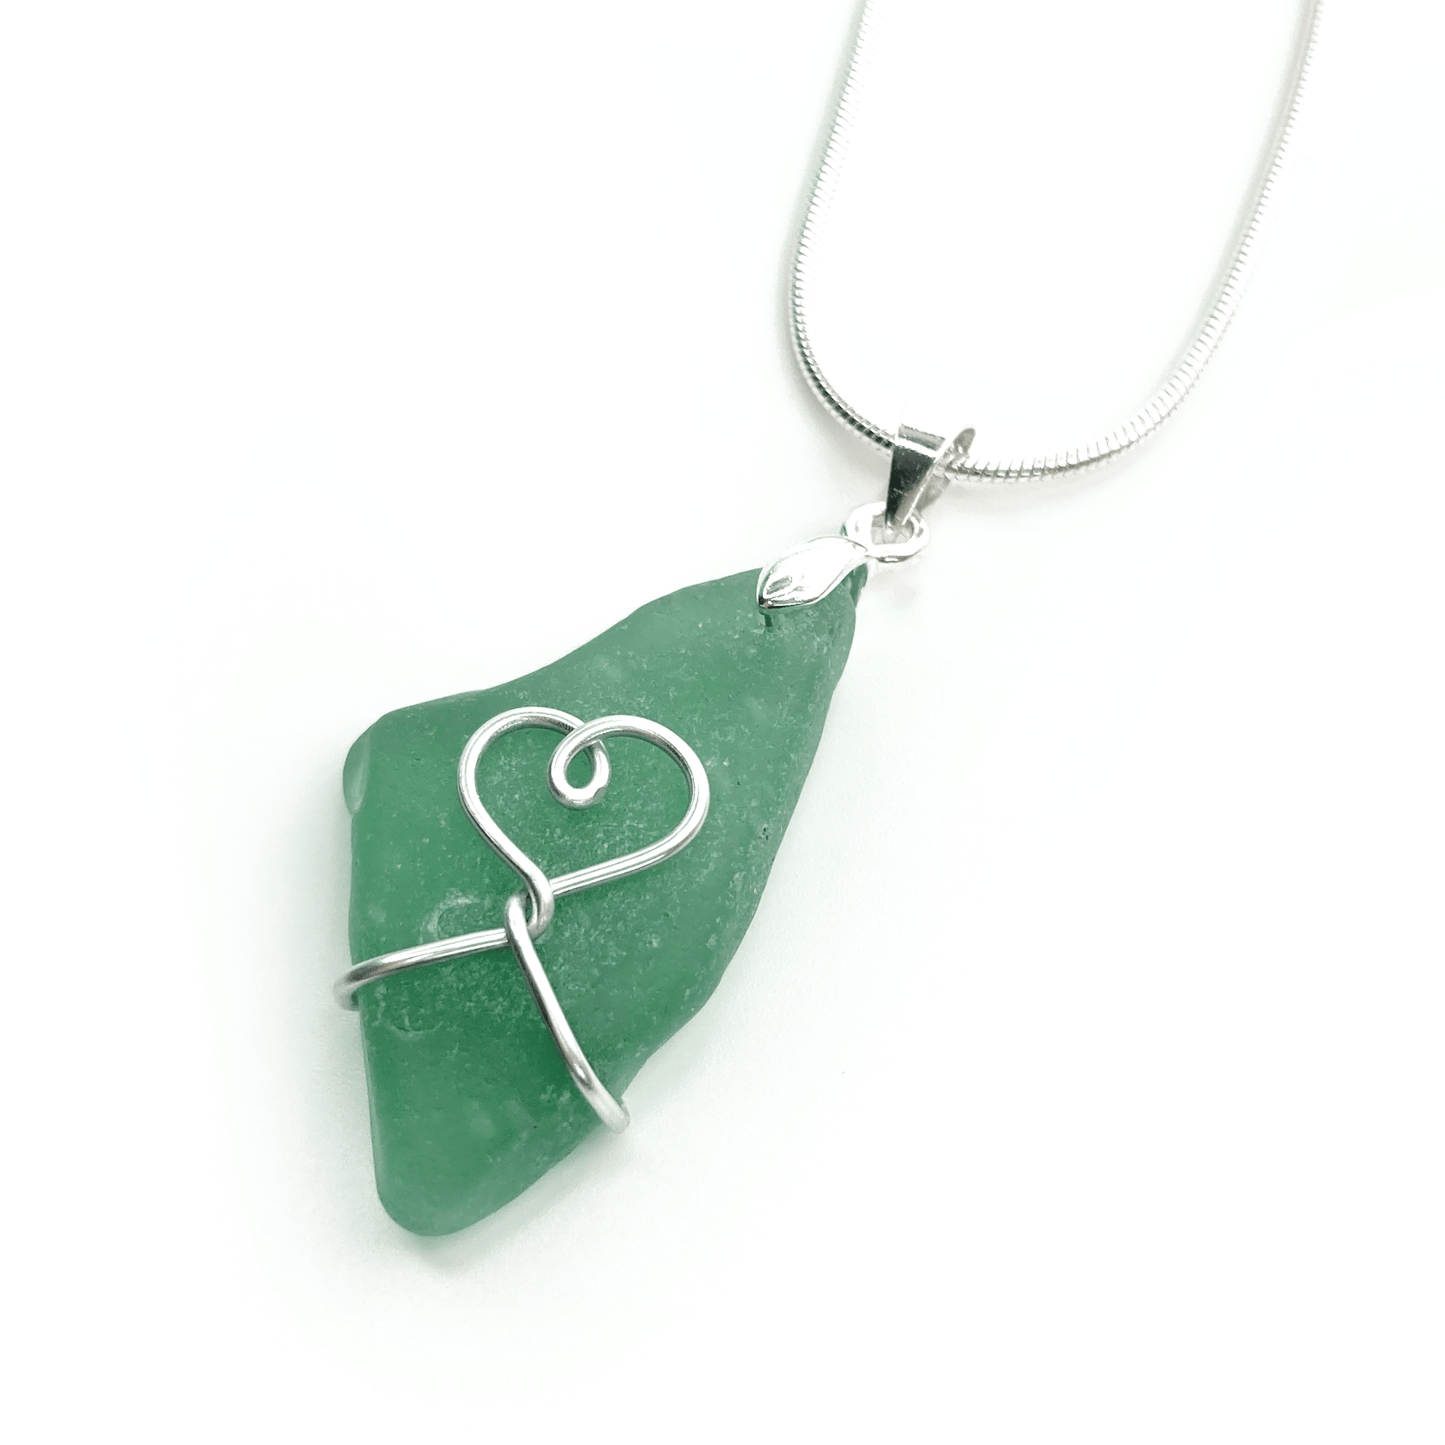 Sea Glass Pendant - Pale Green Heart Wire Wrapped Necklace - Scottish Silver Jewellery - East Neuk Beach Crafts